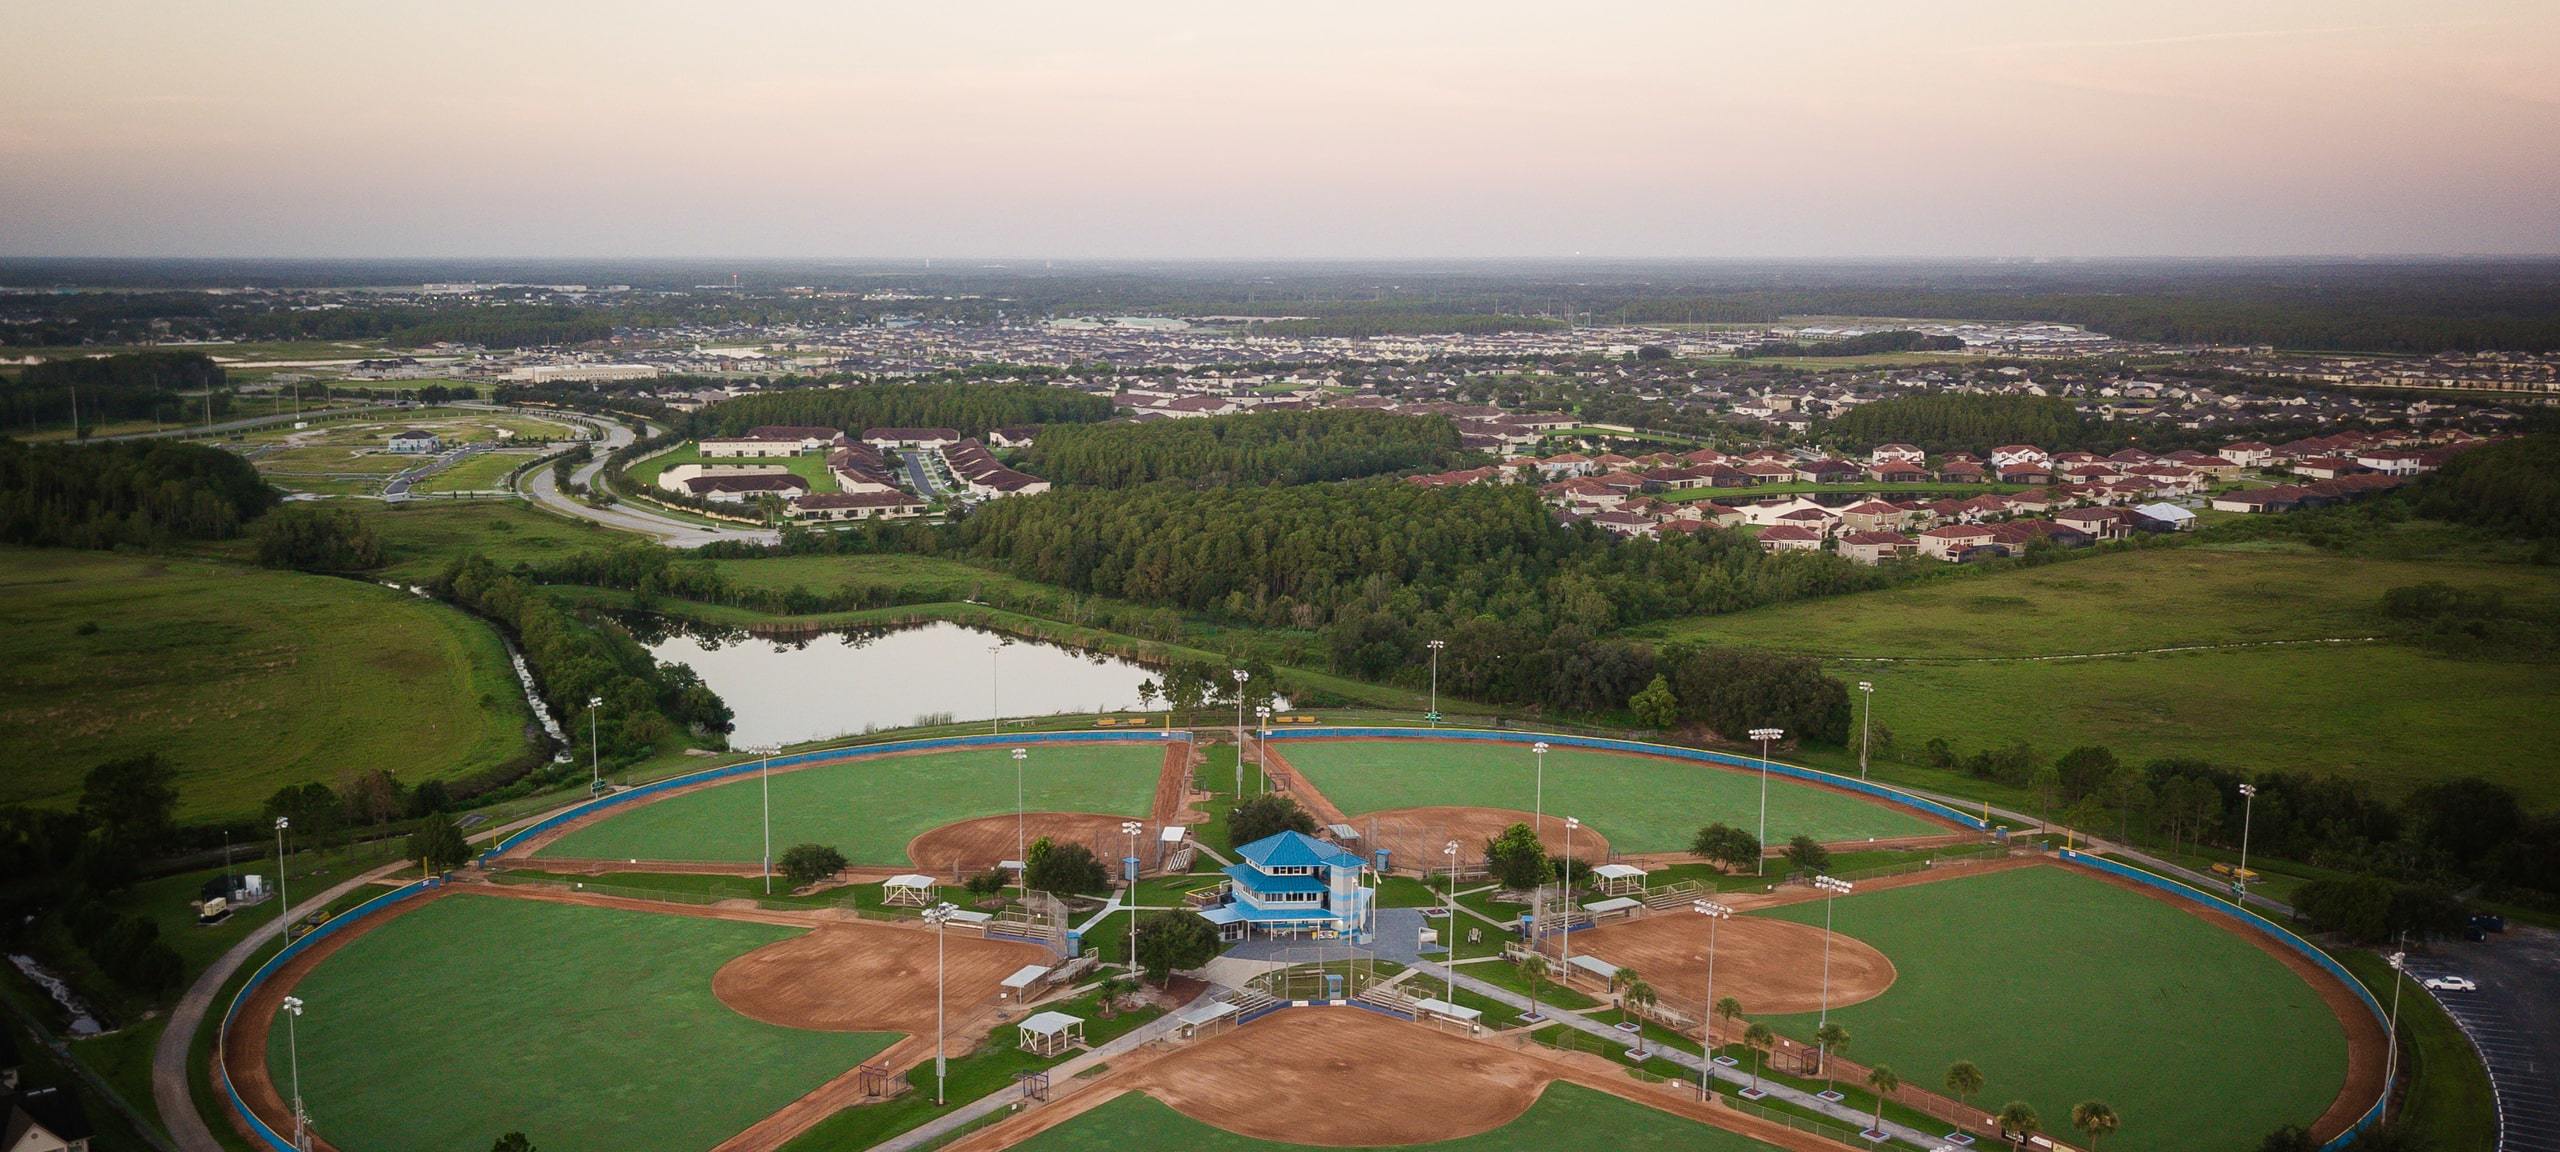 Aerial view of old Osceola County Softball Complex during sunset in Kissimmee, FL